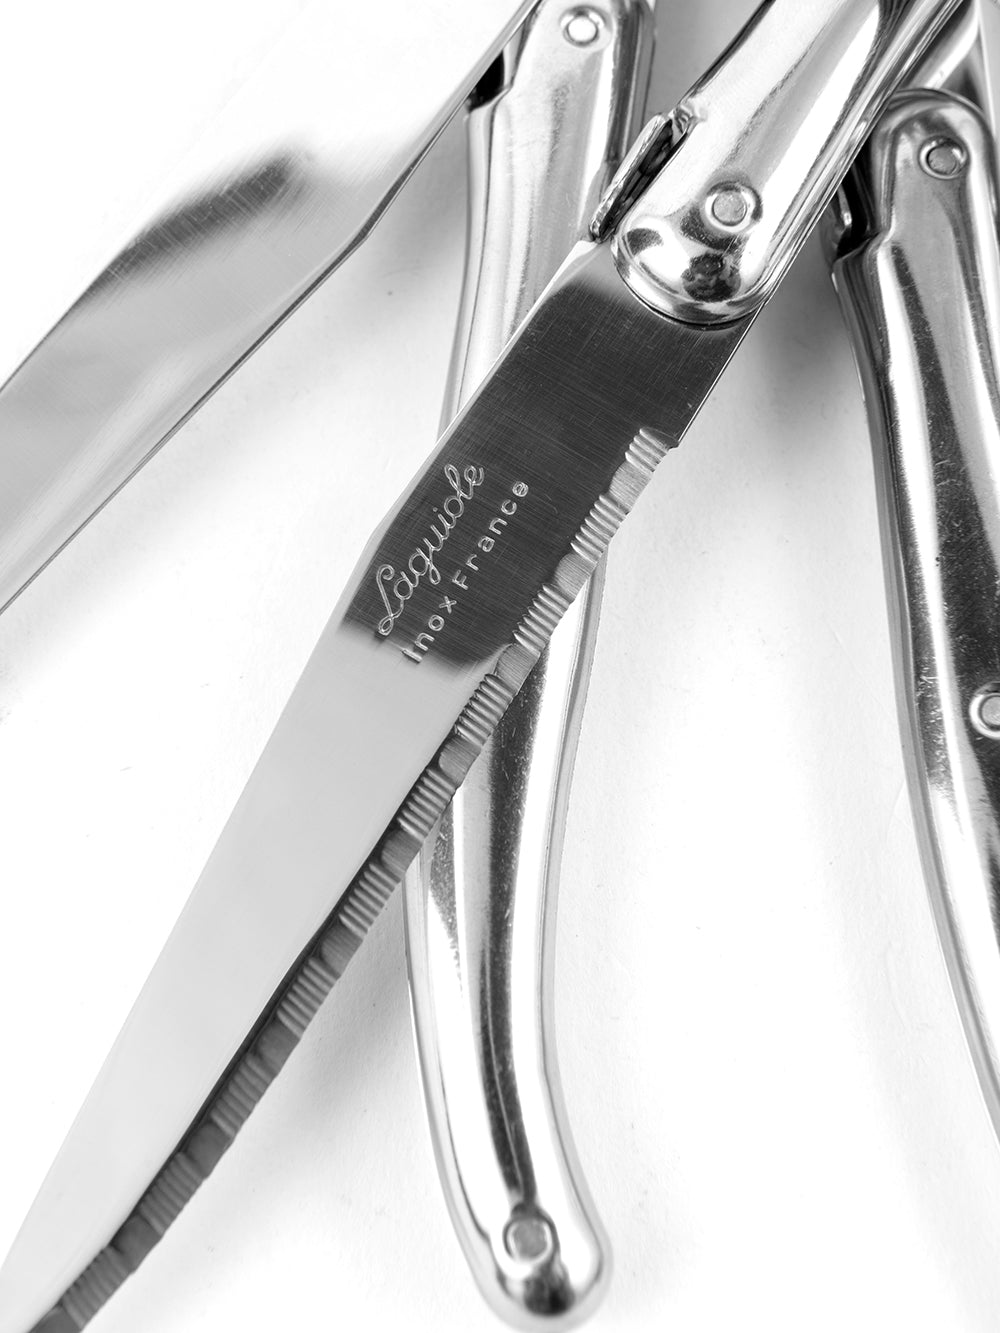 Laguiole Stainless Steel Knives in Presentation Box (Set of 6) Cutlery Laguiole Brand_Laguiole Flatware Sets Kitchen_Dinnerware Kitchen_Kitchenware Laguiole Laguiole-Stainless-Steel-Knives-Ambient-Photo-_Web